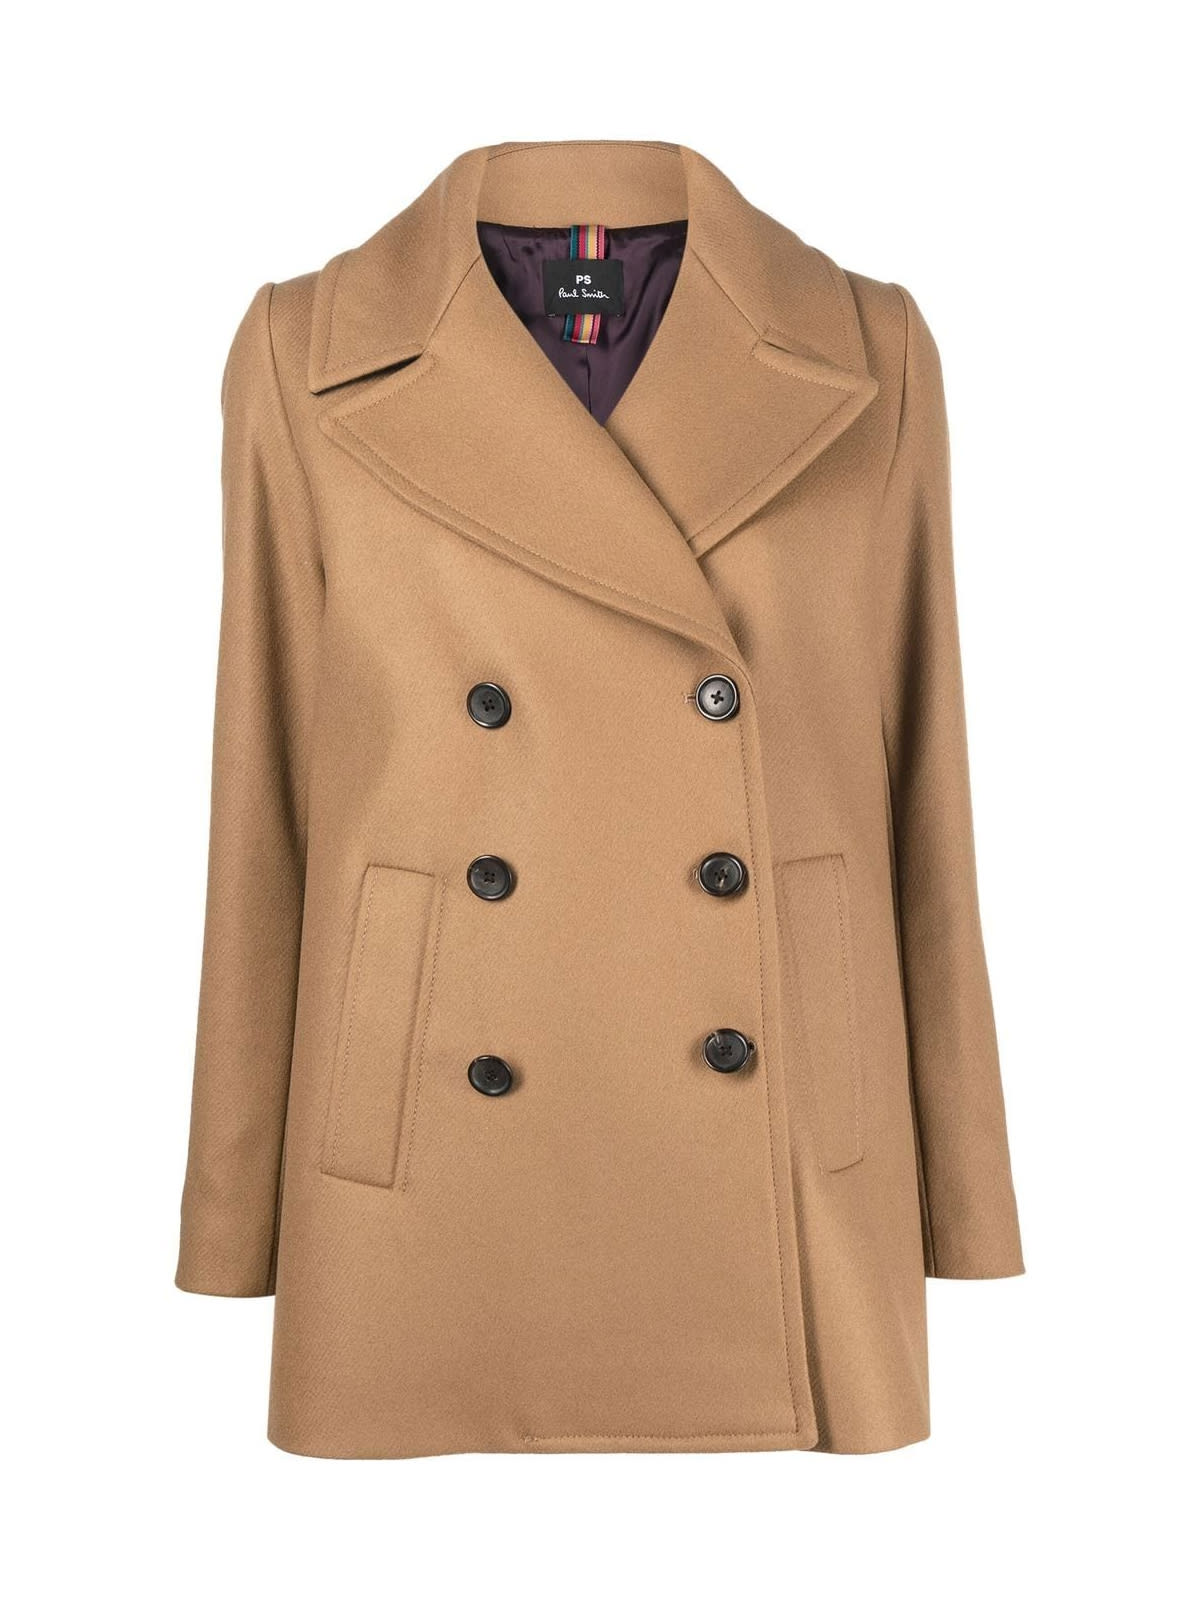 PS by Paul Smith Womens Peacoat